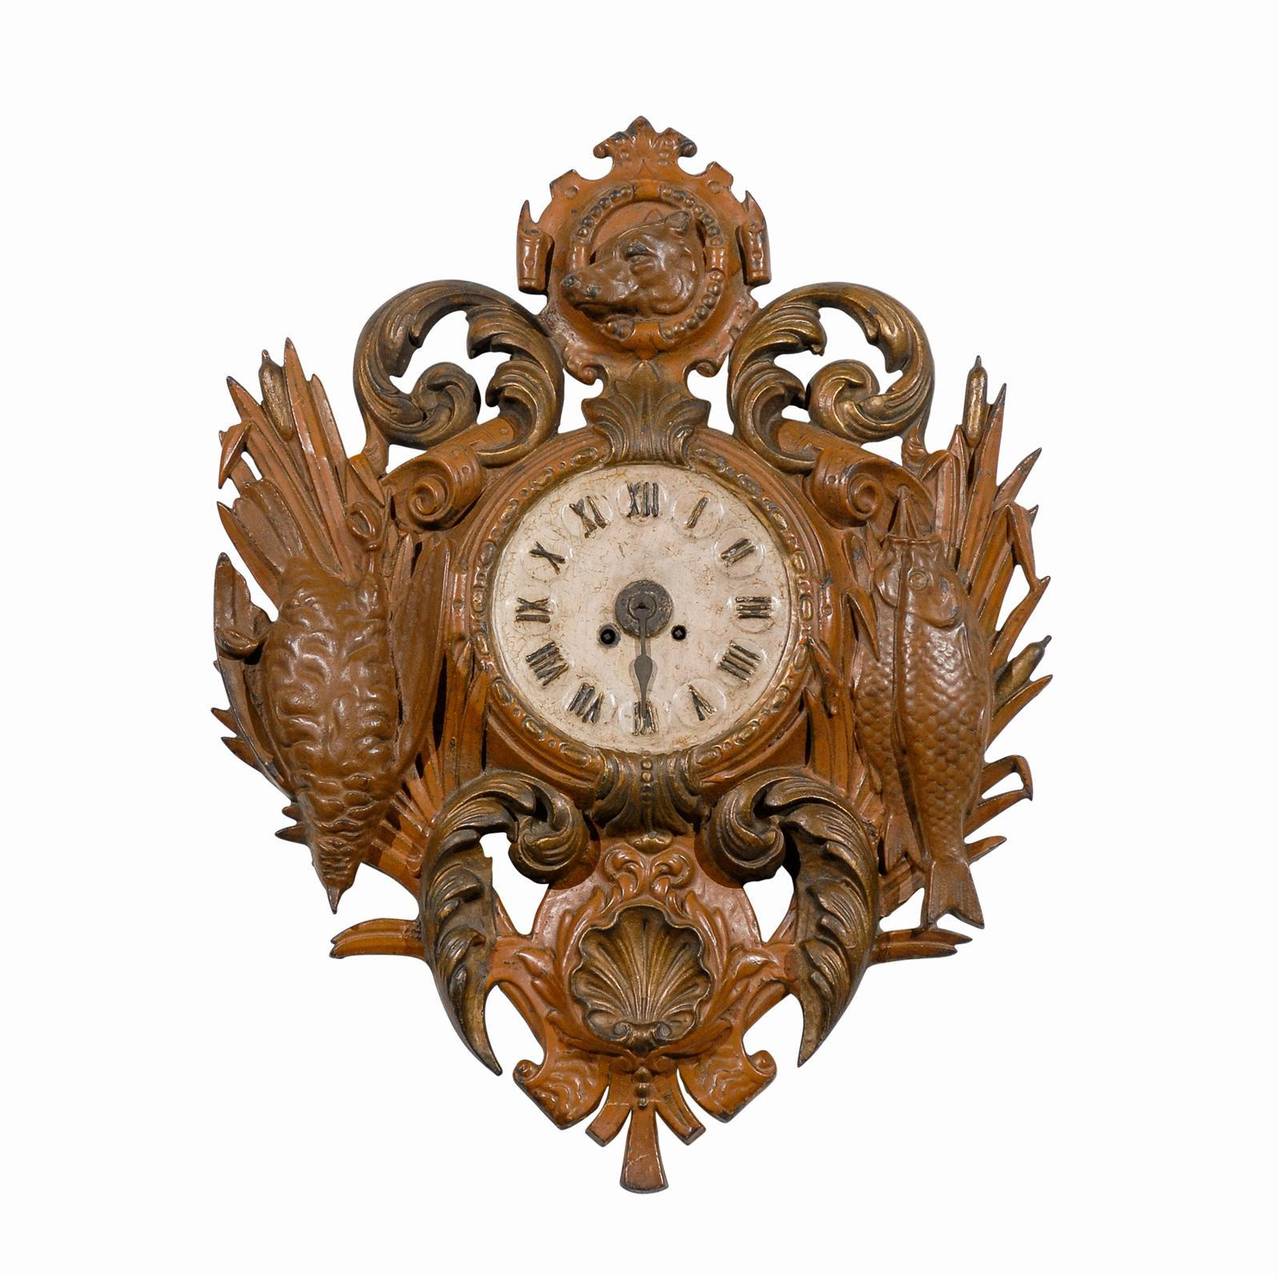 19th CenturyPainted French Iron Cartel Clock in the Black Forest Style with Fishing and Hunting Depictions. A Quartz Movement Has Been Added